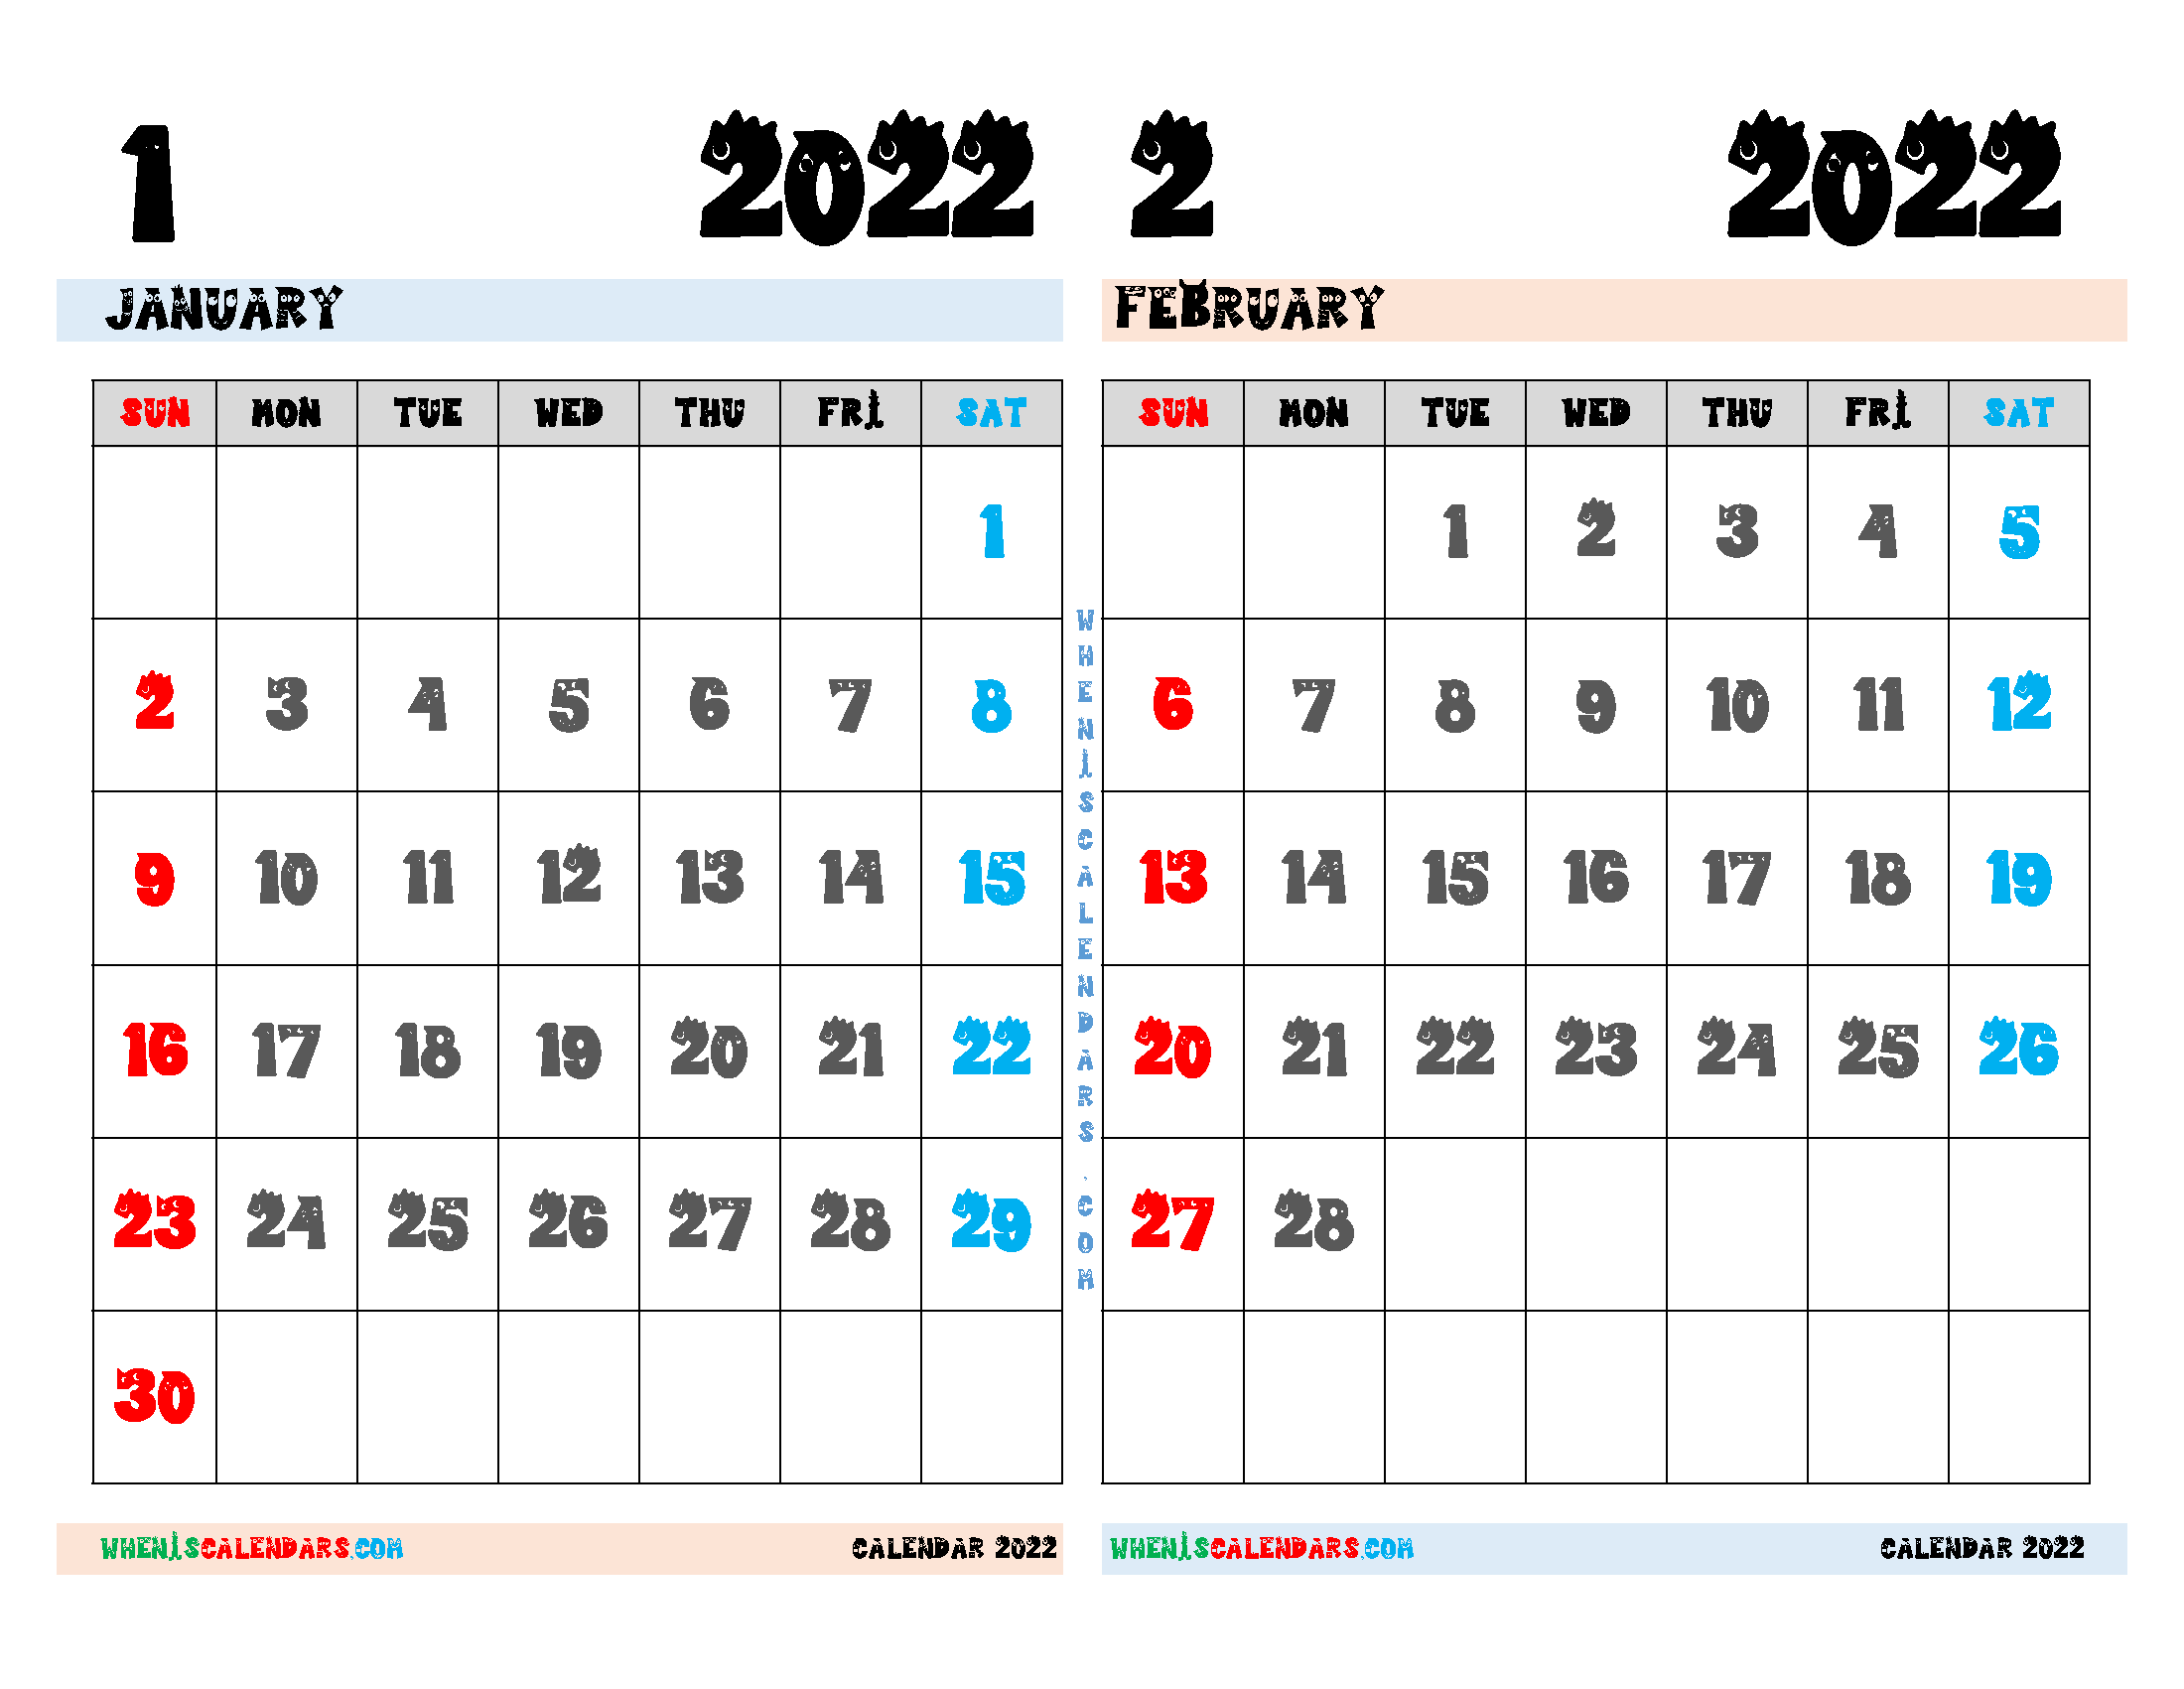 Download Free January and February 2022 Calendar Printable as PDF document and high resolution PNG Image file format (landcape))